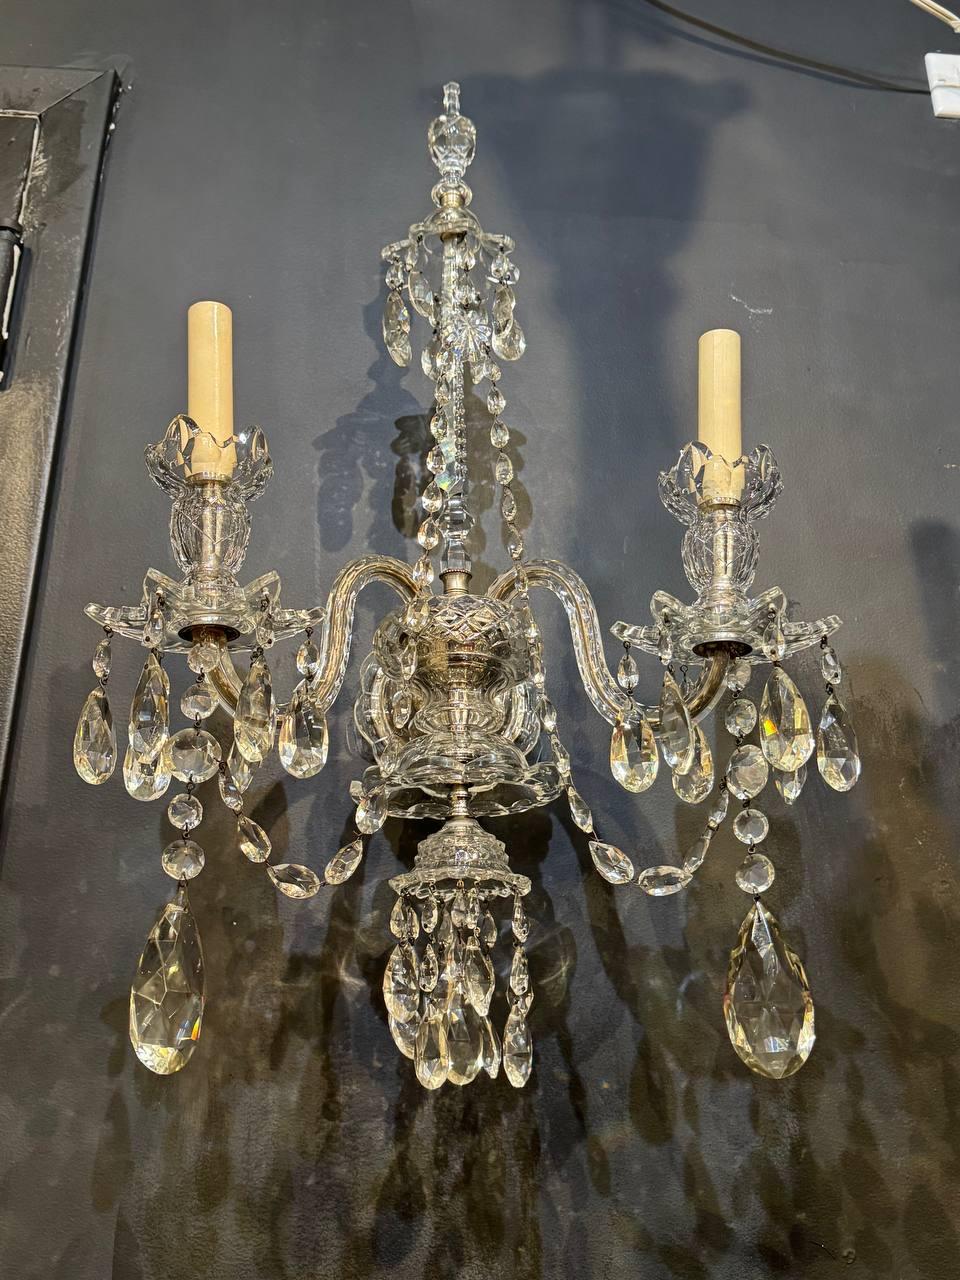 A beautiful pair of circa 1900 Baccarat crystal sconces with crystal hangings